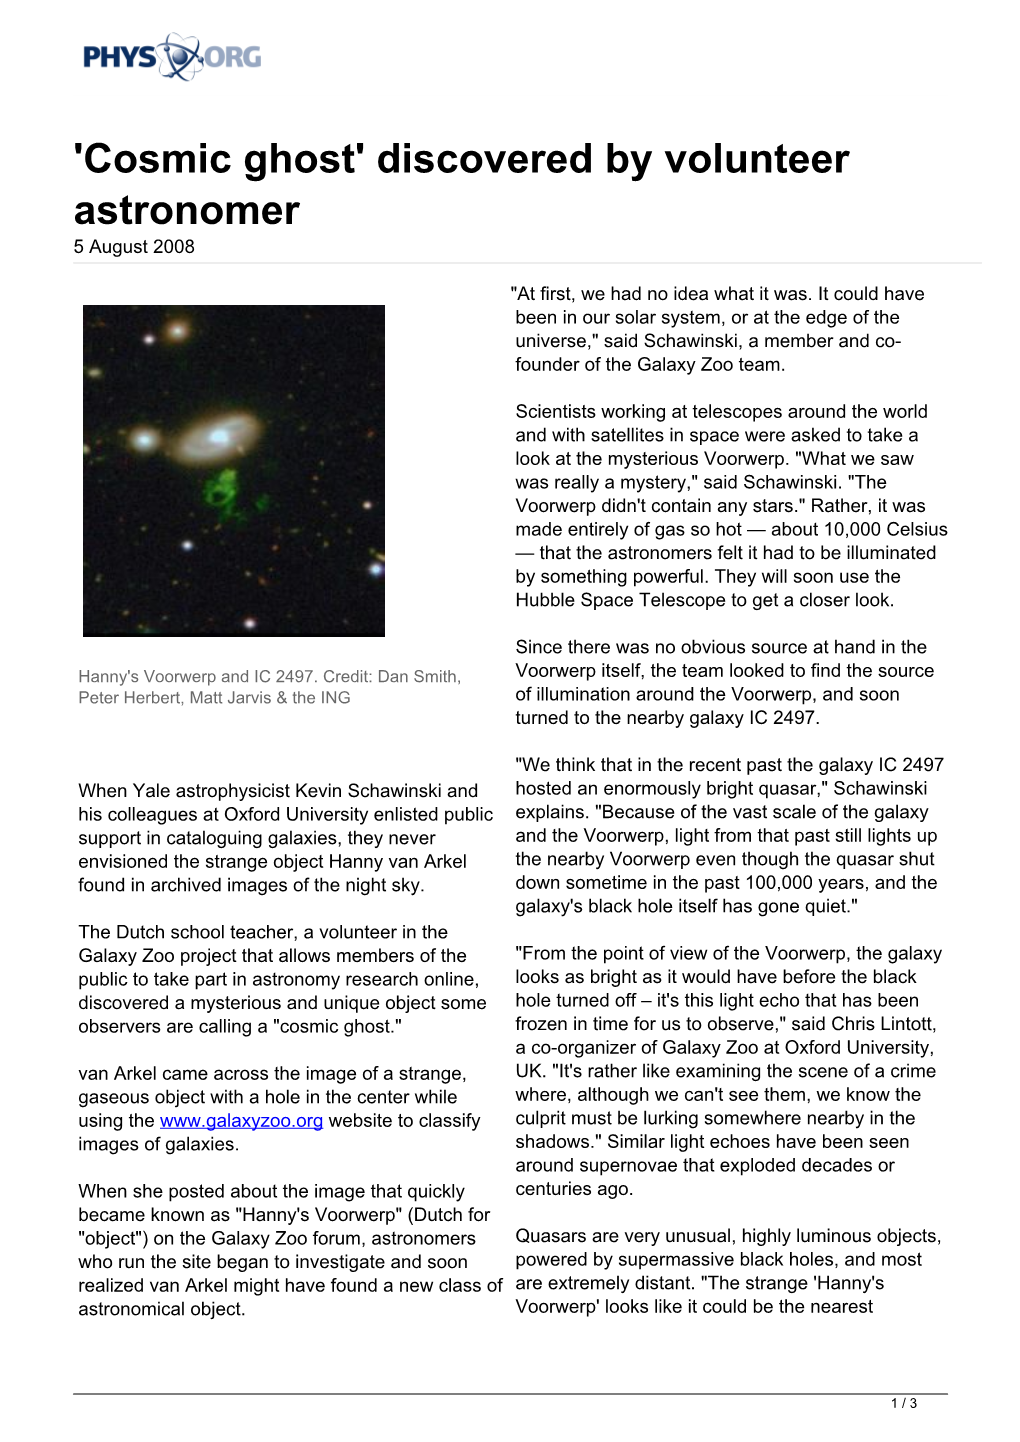 'Cosmic Ghost' Discovered by Volunteer Astronomer 5 August 2008